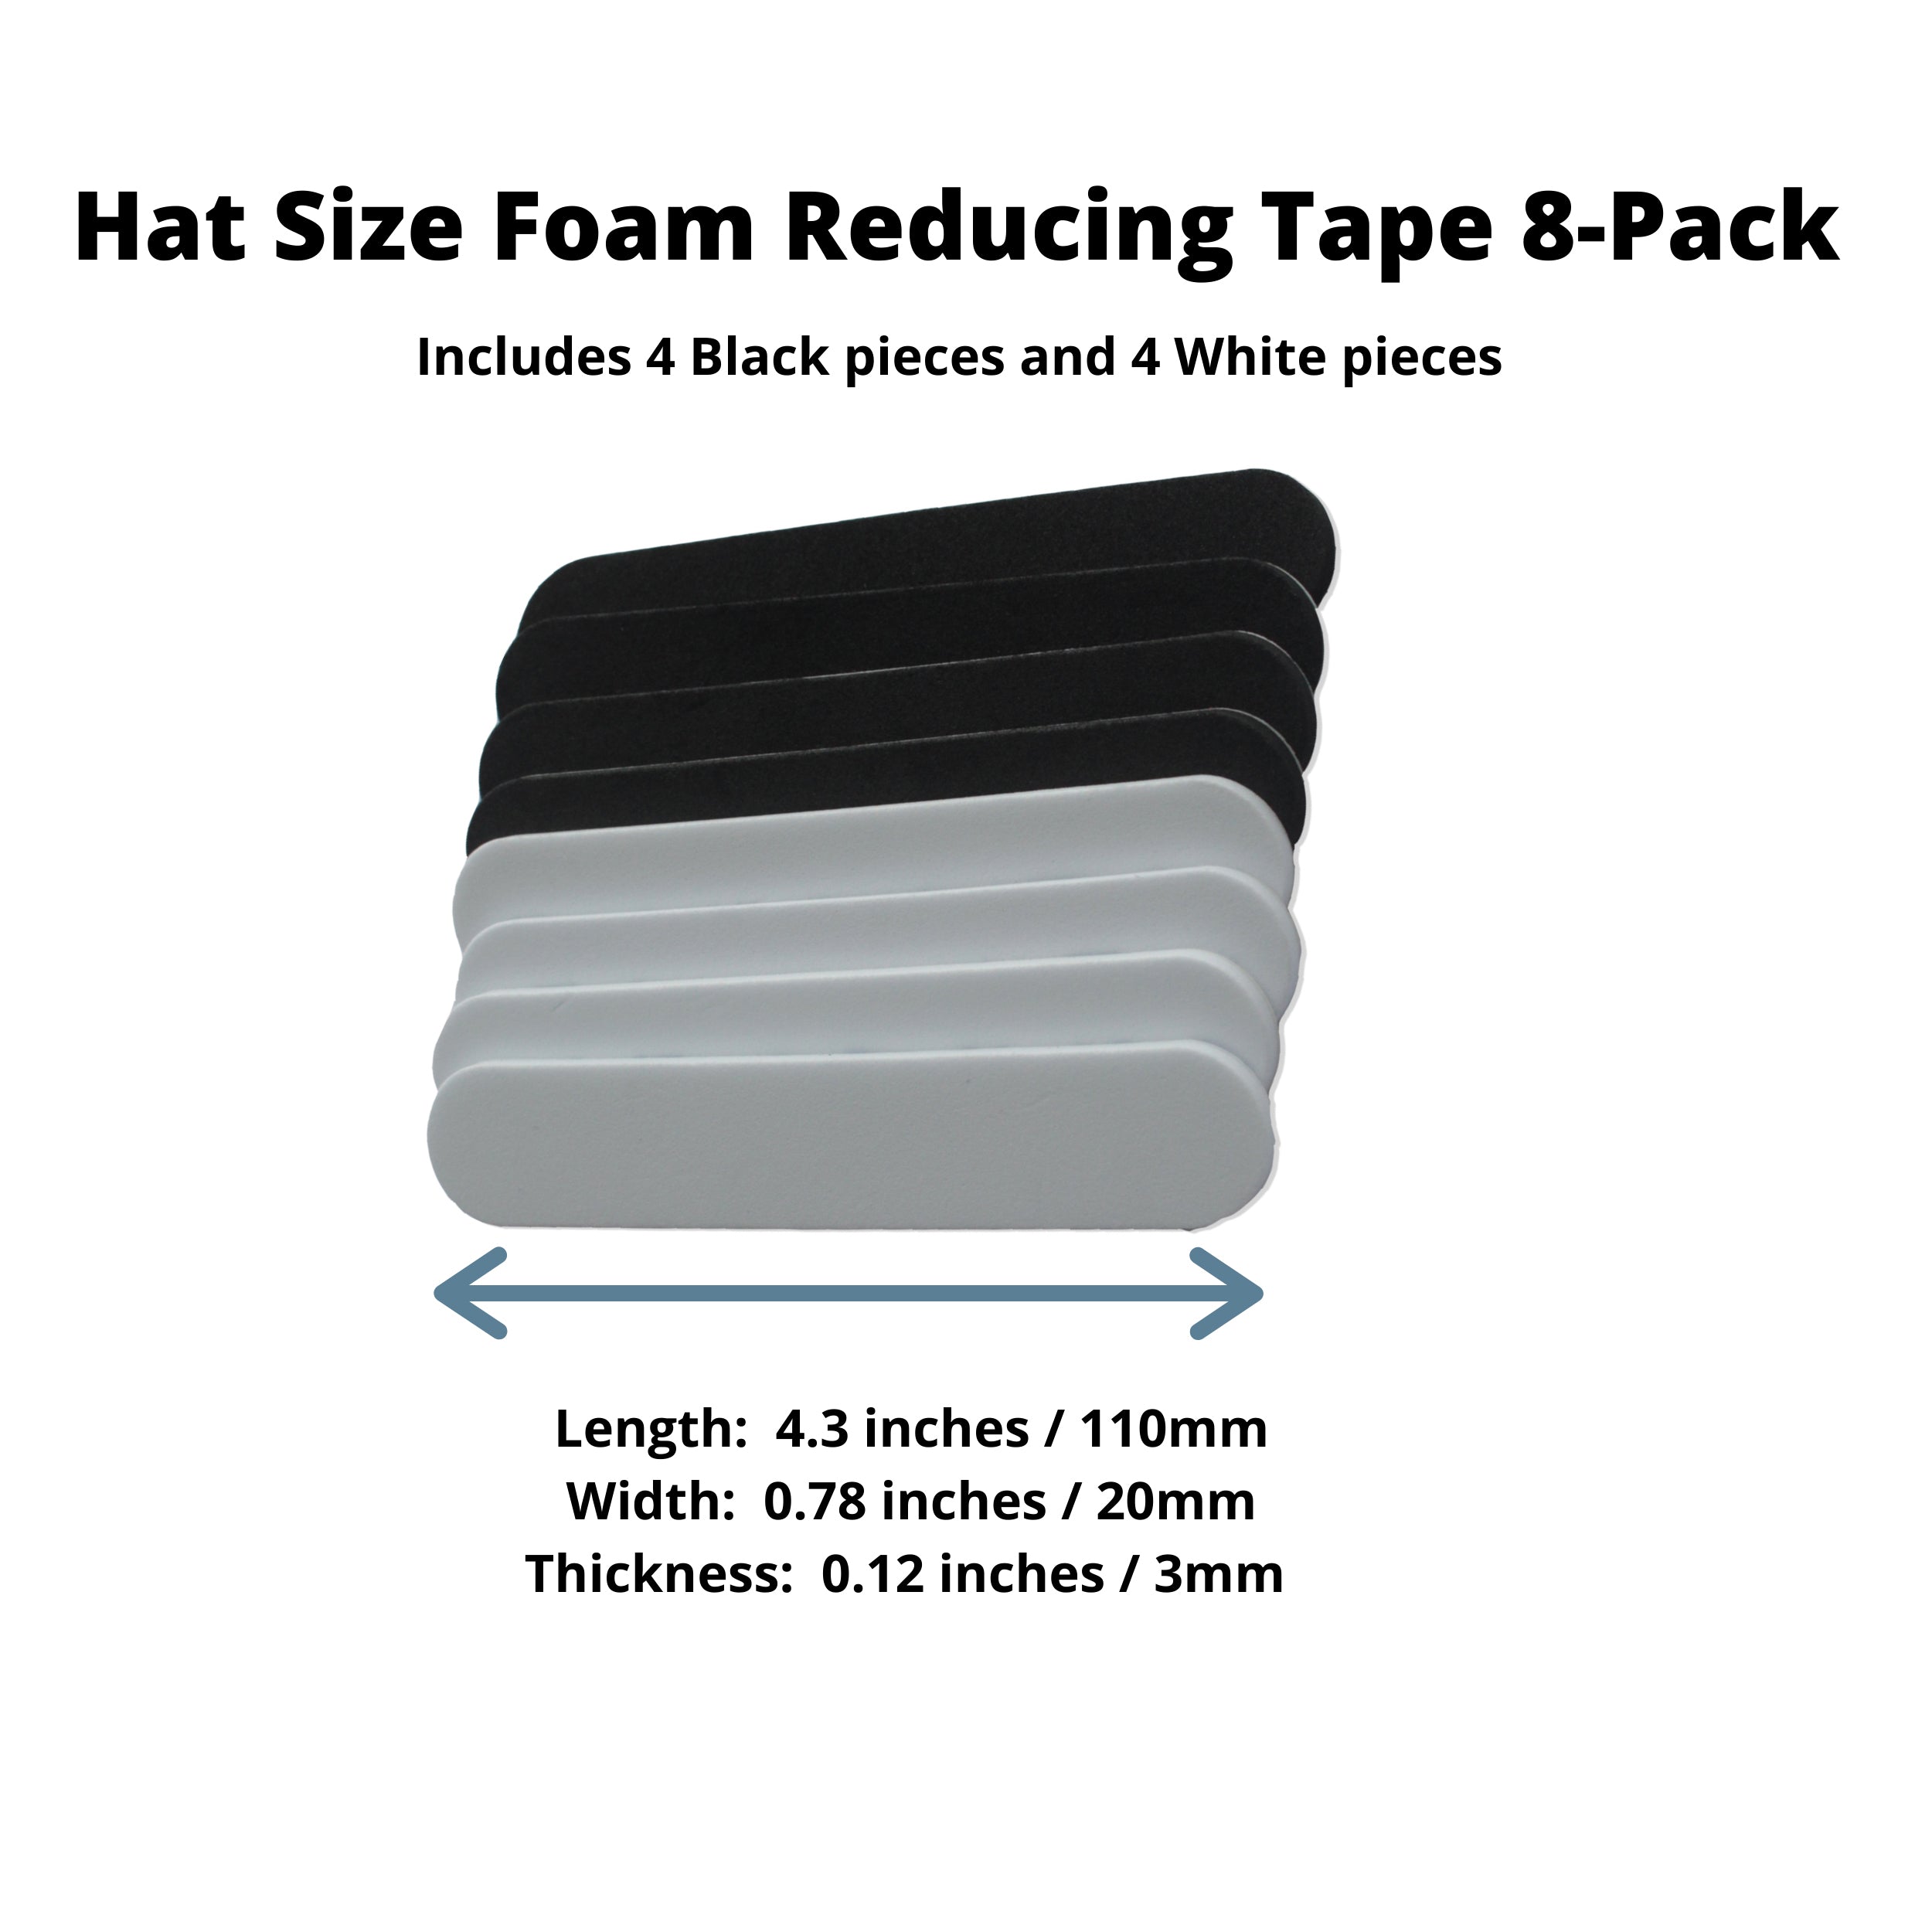 Self-Adhesive Hat Size Reducing Tape to Adjust Loose Fitting Hats